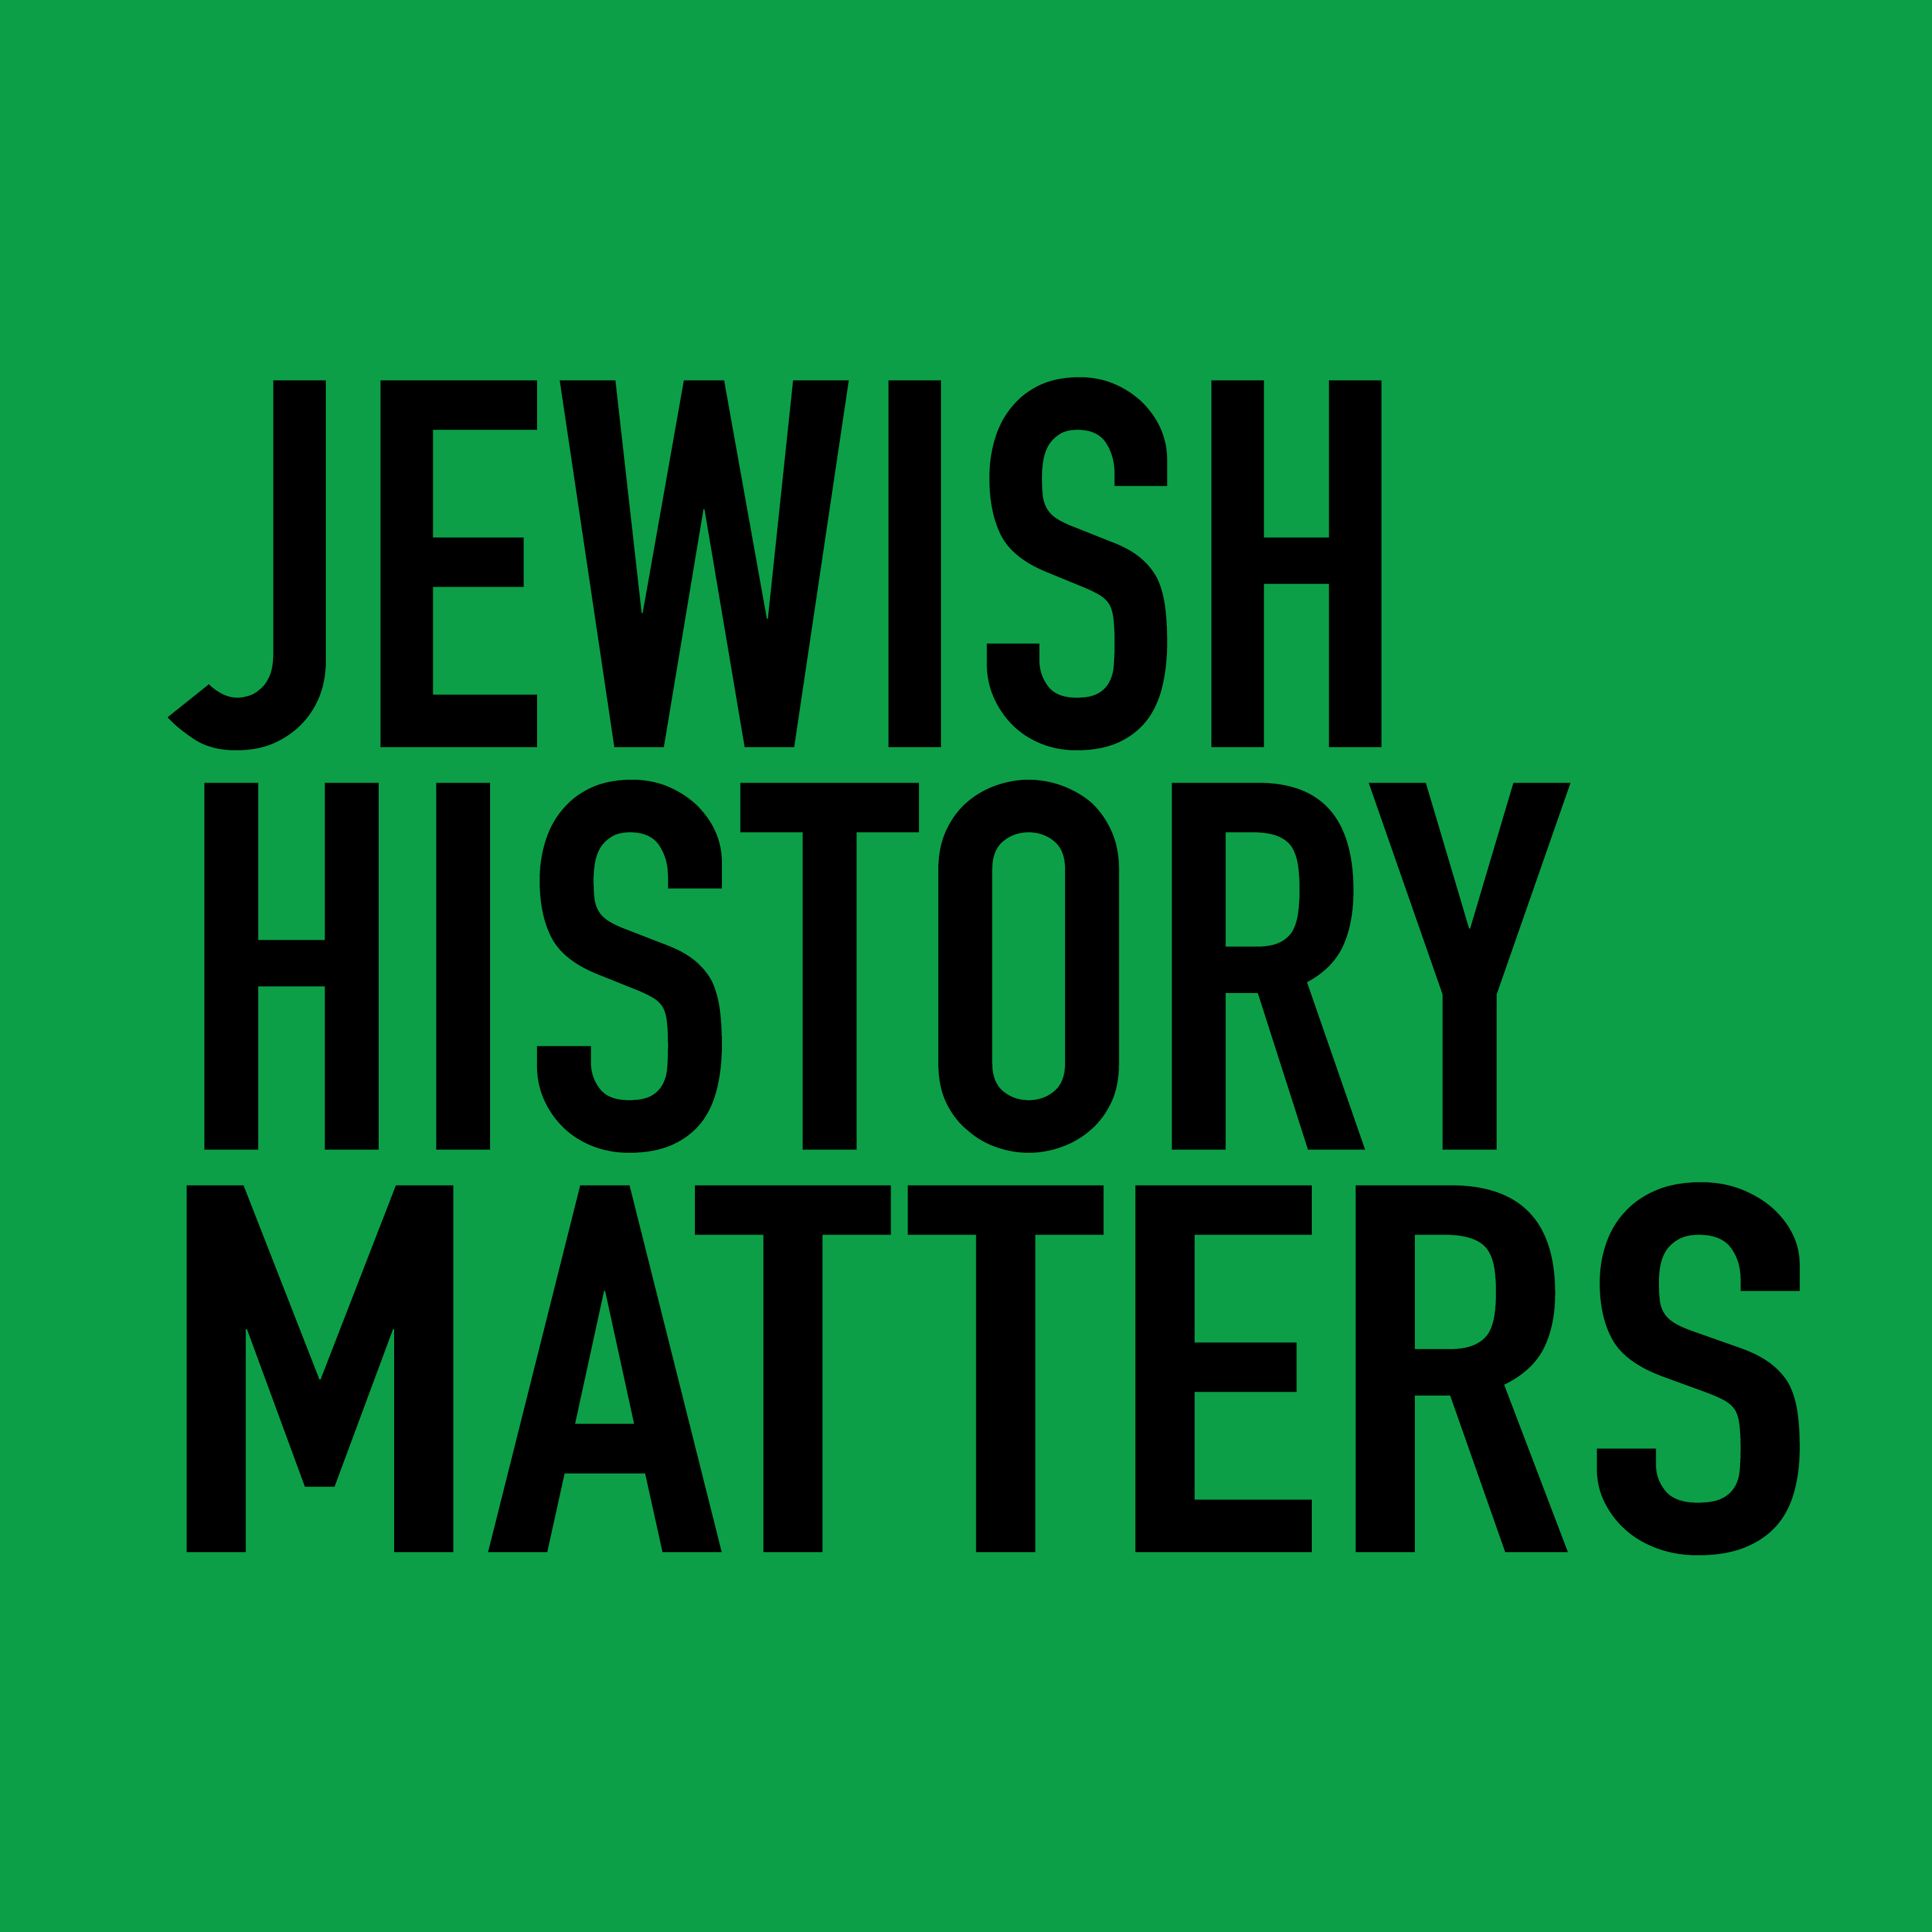 subscribe-on-android-to-jewish-history-matters